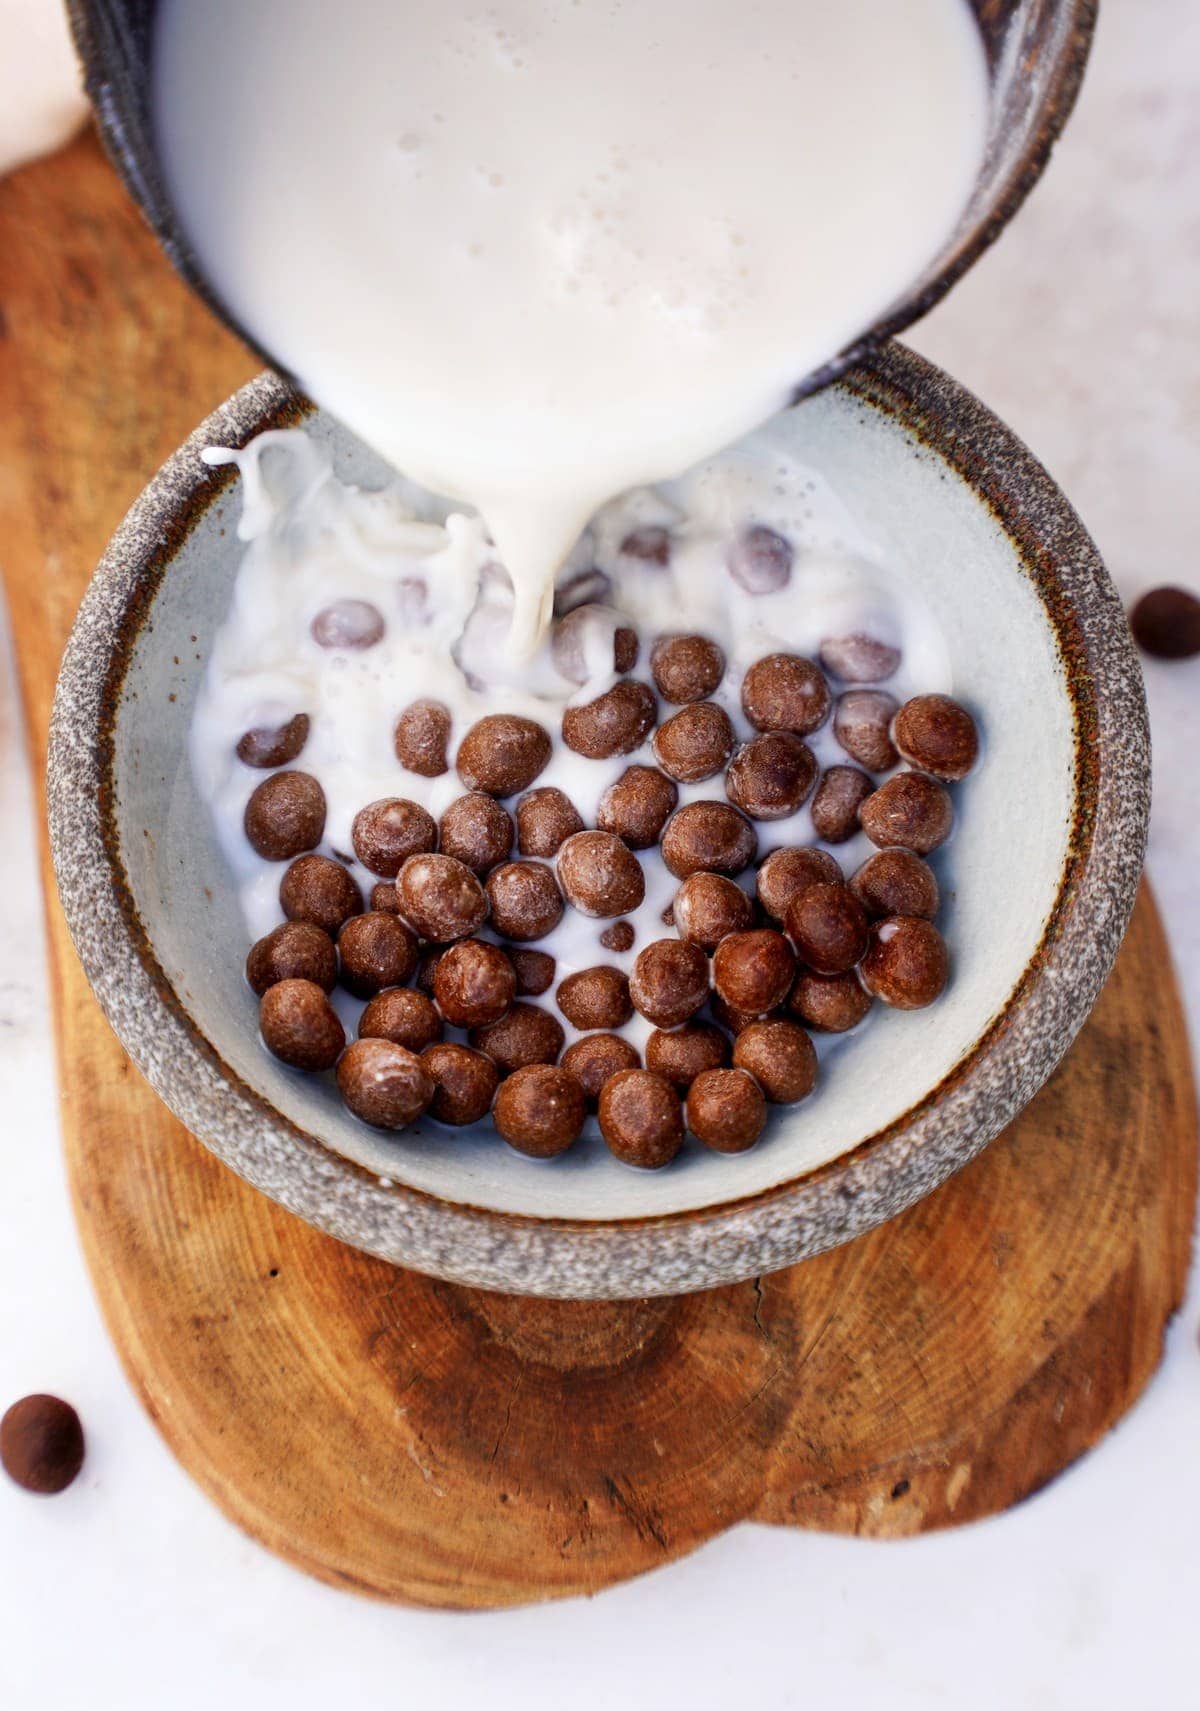 pouring dairy-free milk into bowl with homemade chocolate cereal (cocoa puffs)